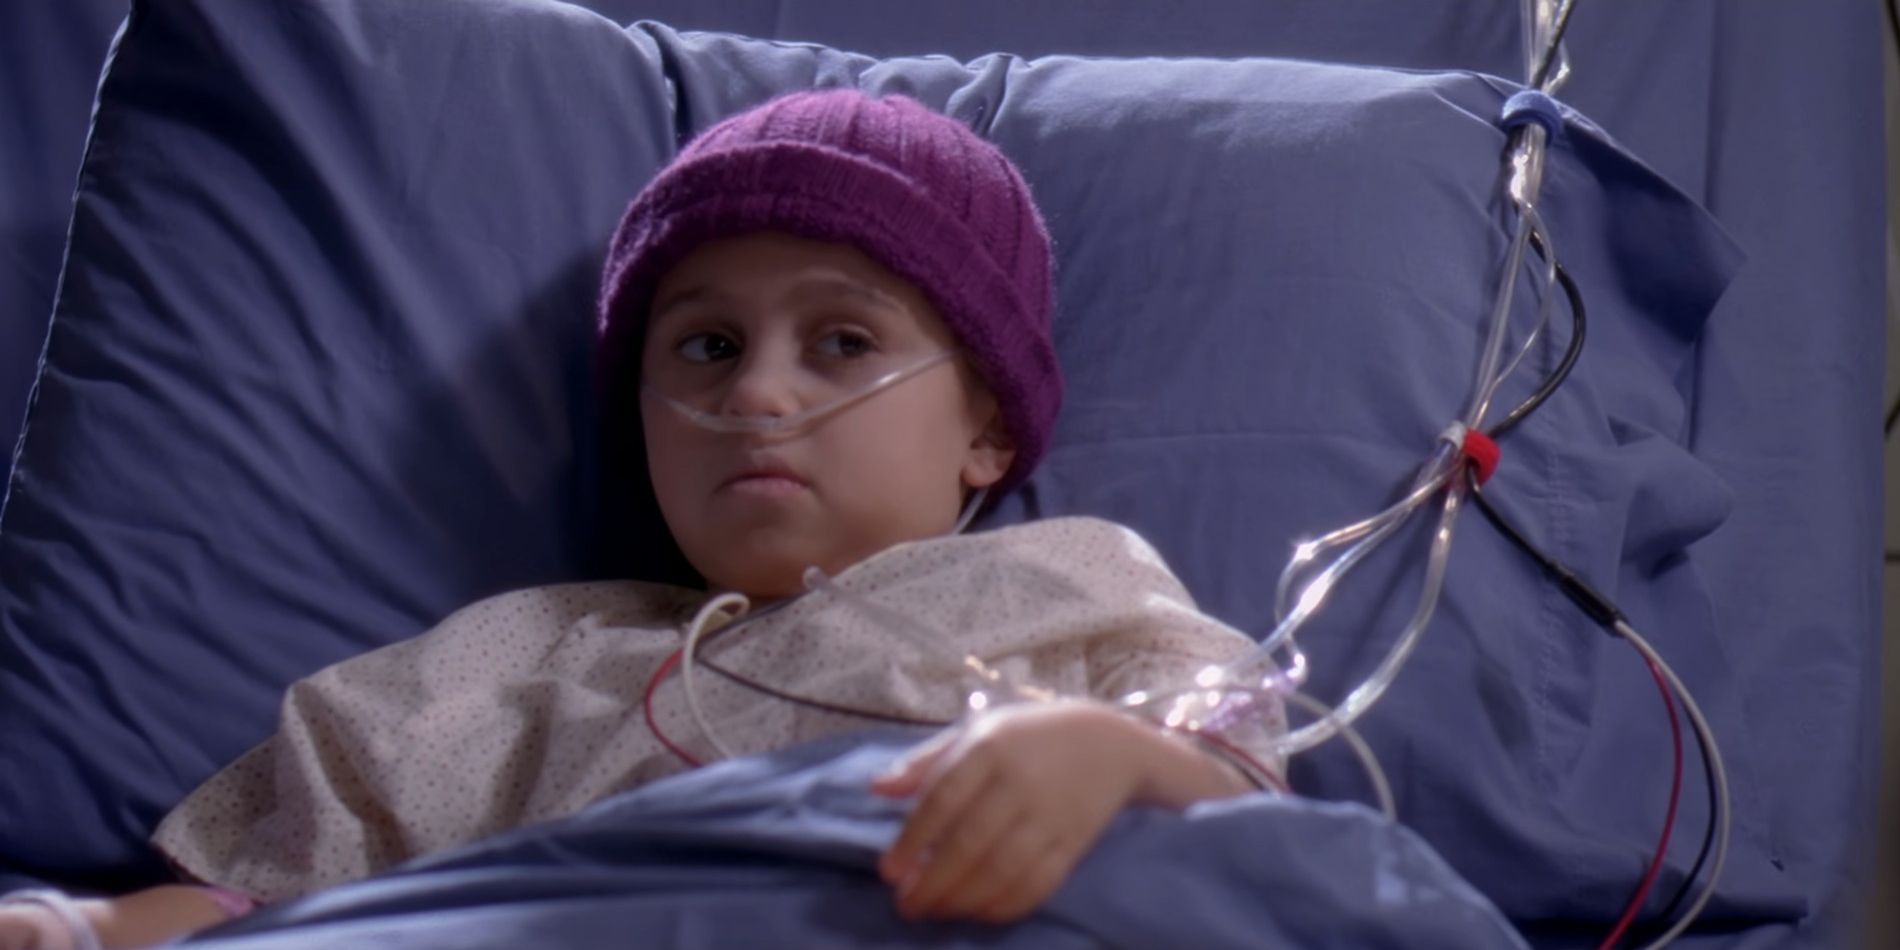 Young Patient Jessica Smithson Lying In Hospital Bed In Grey's Anatomy.jpg